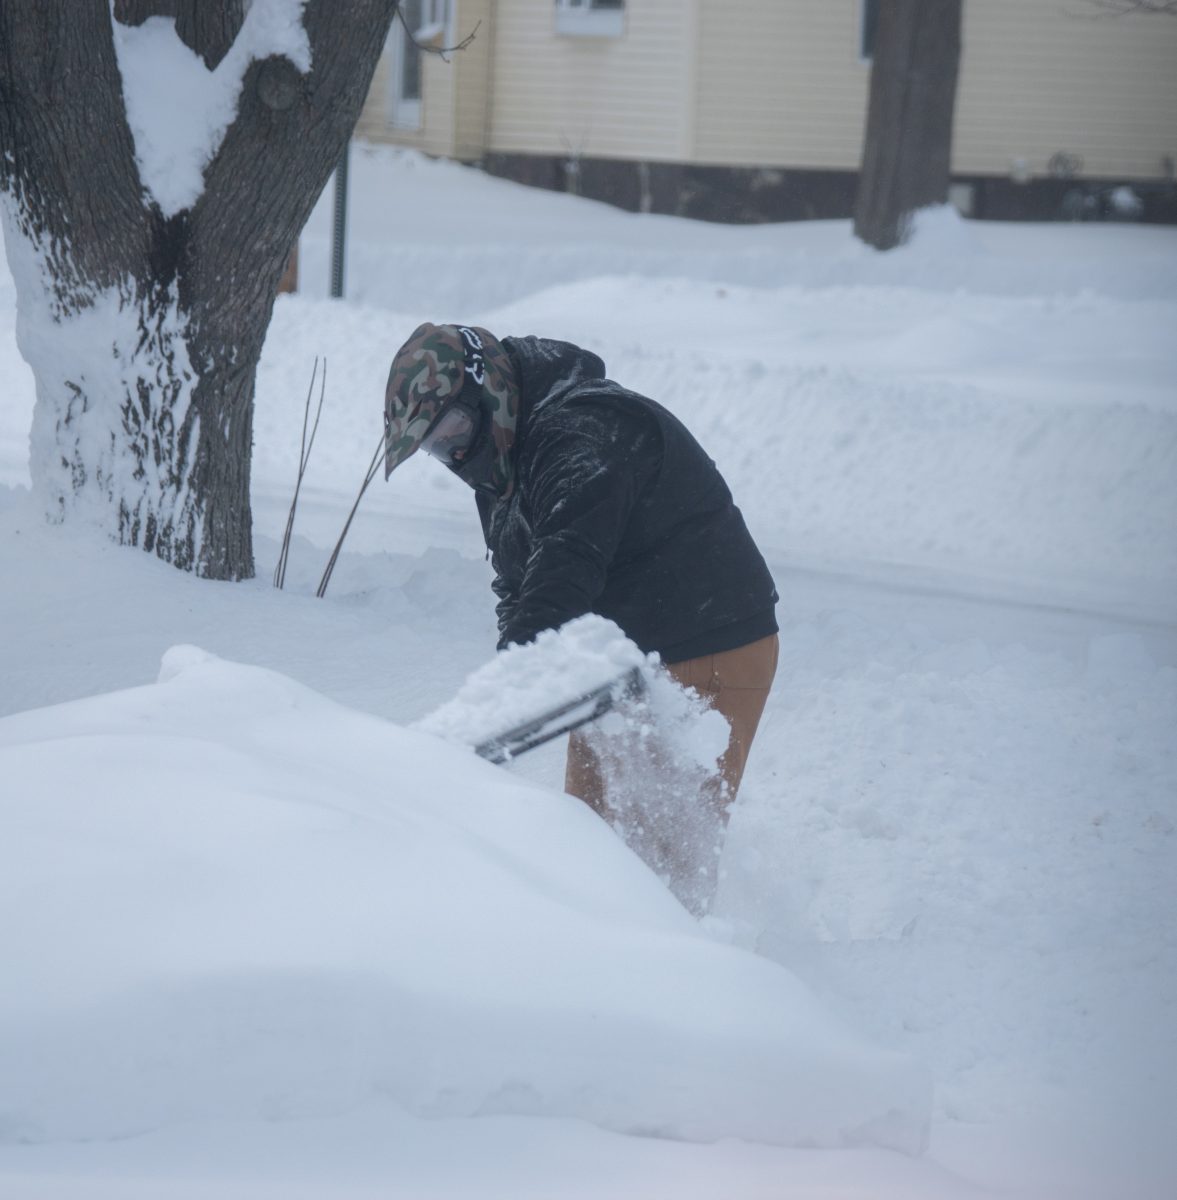 Shovel snow the right way: Tips for safe snow removal